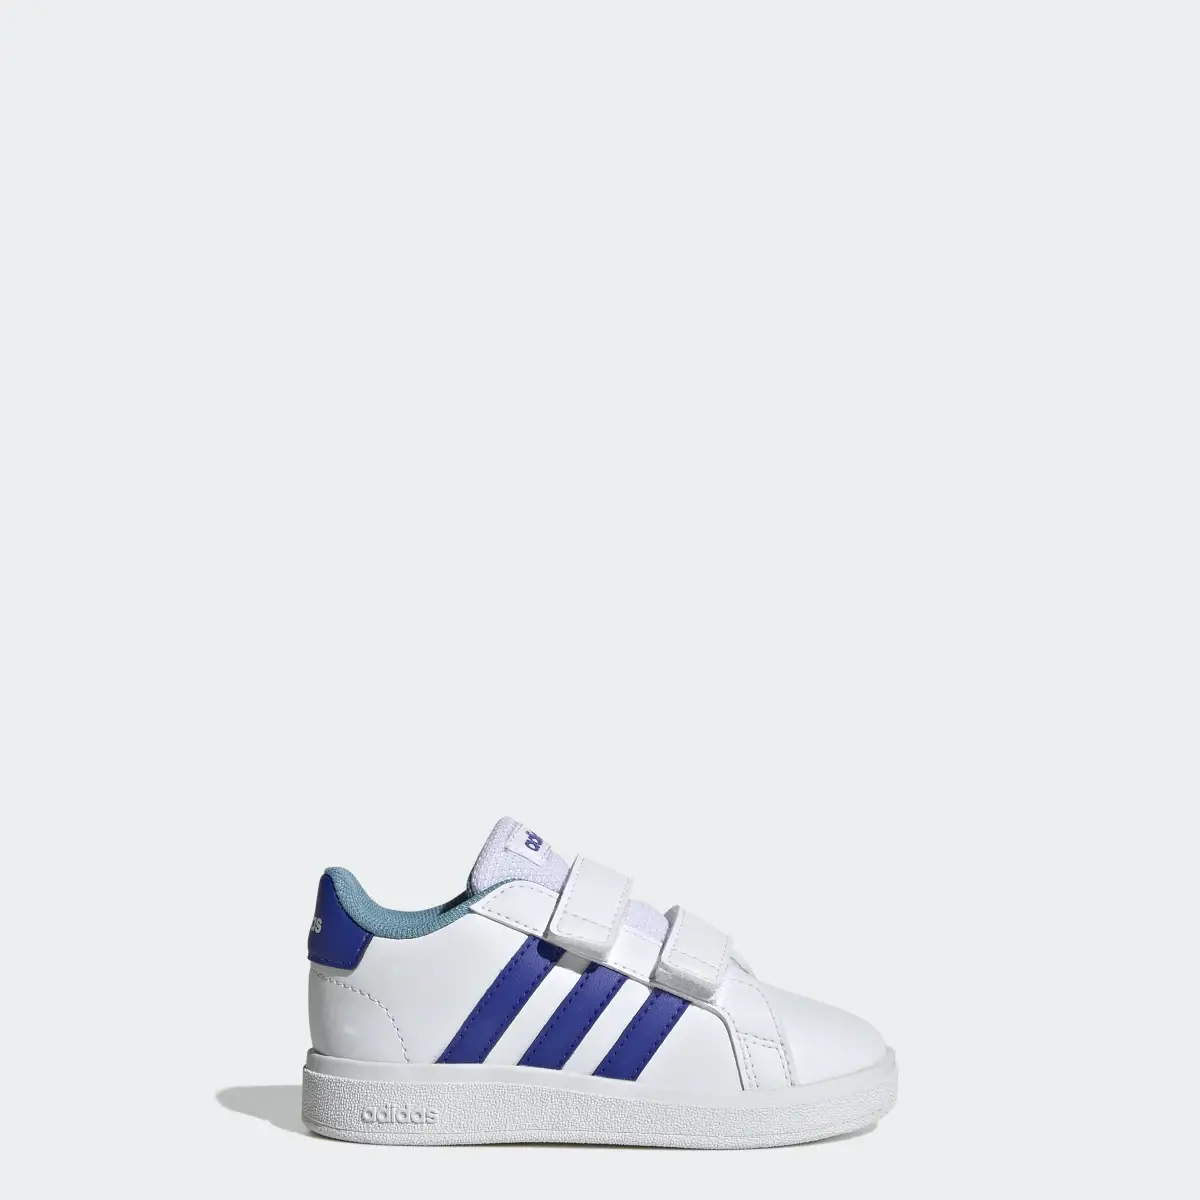 Adidas Grand Court Lifestyle Hook and Loop Schuh. 1